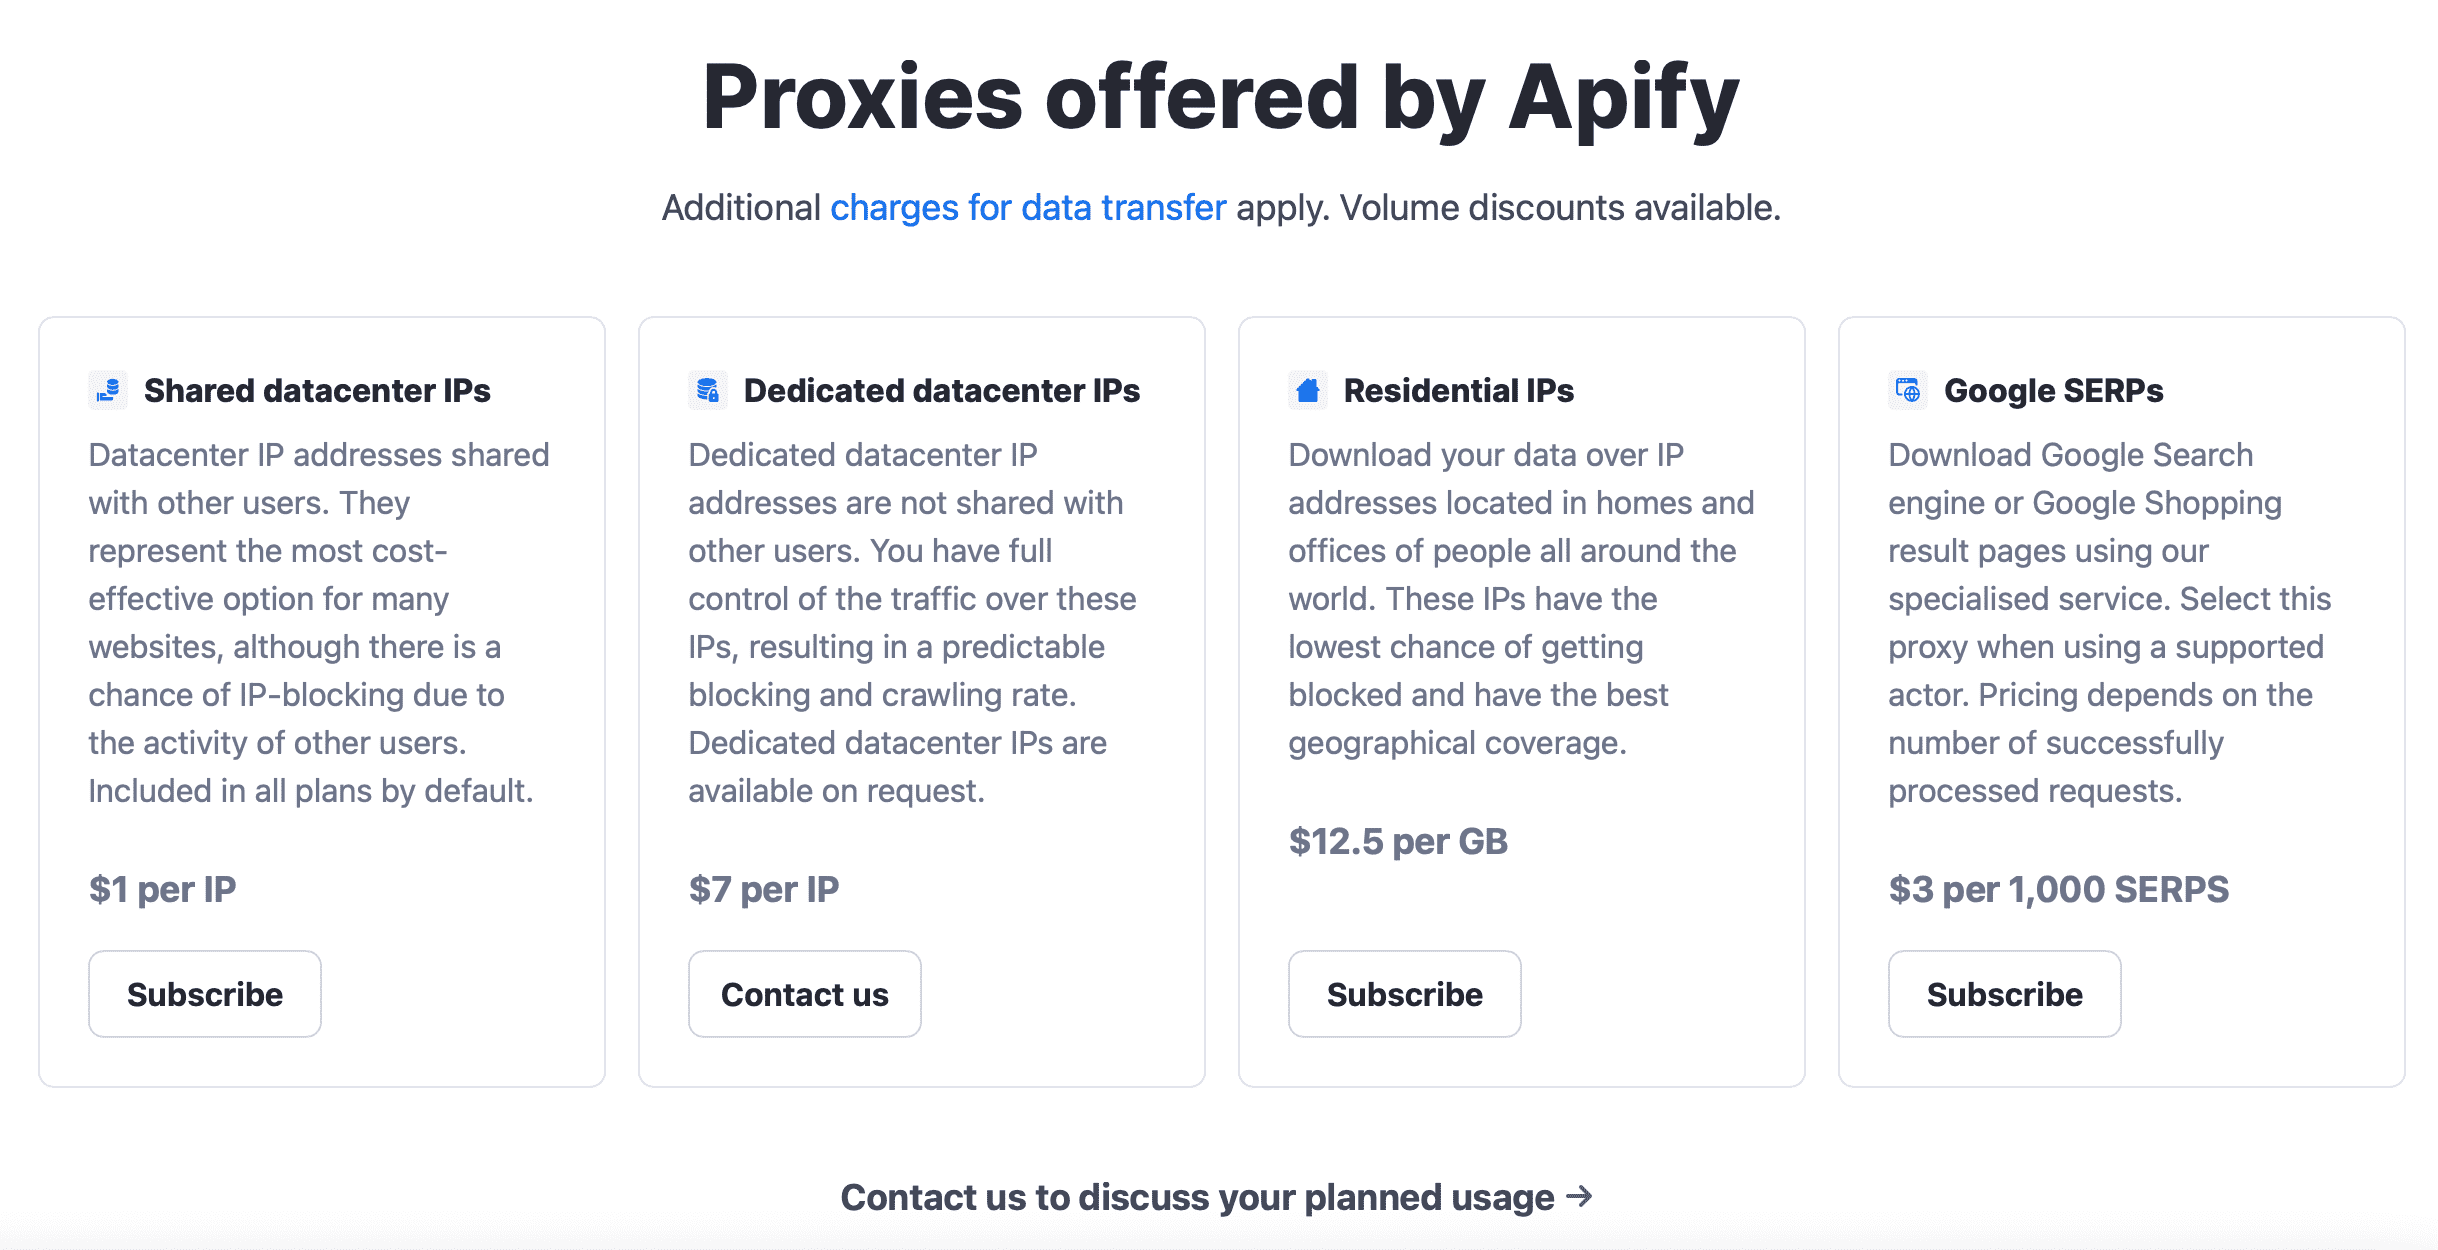 Proxies offered by Apify